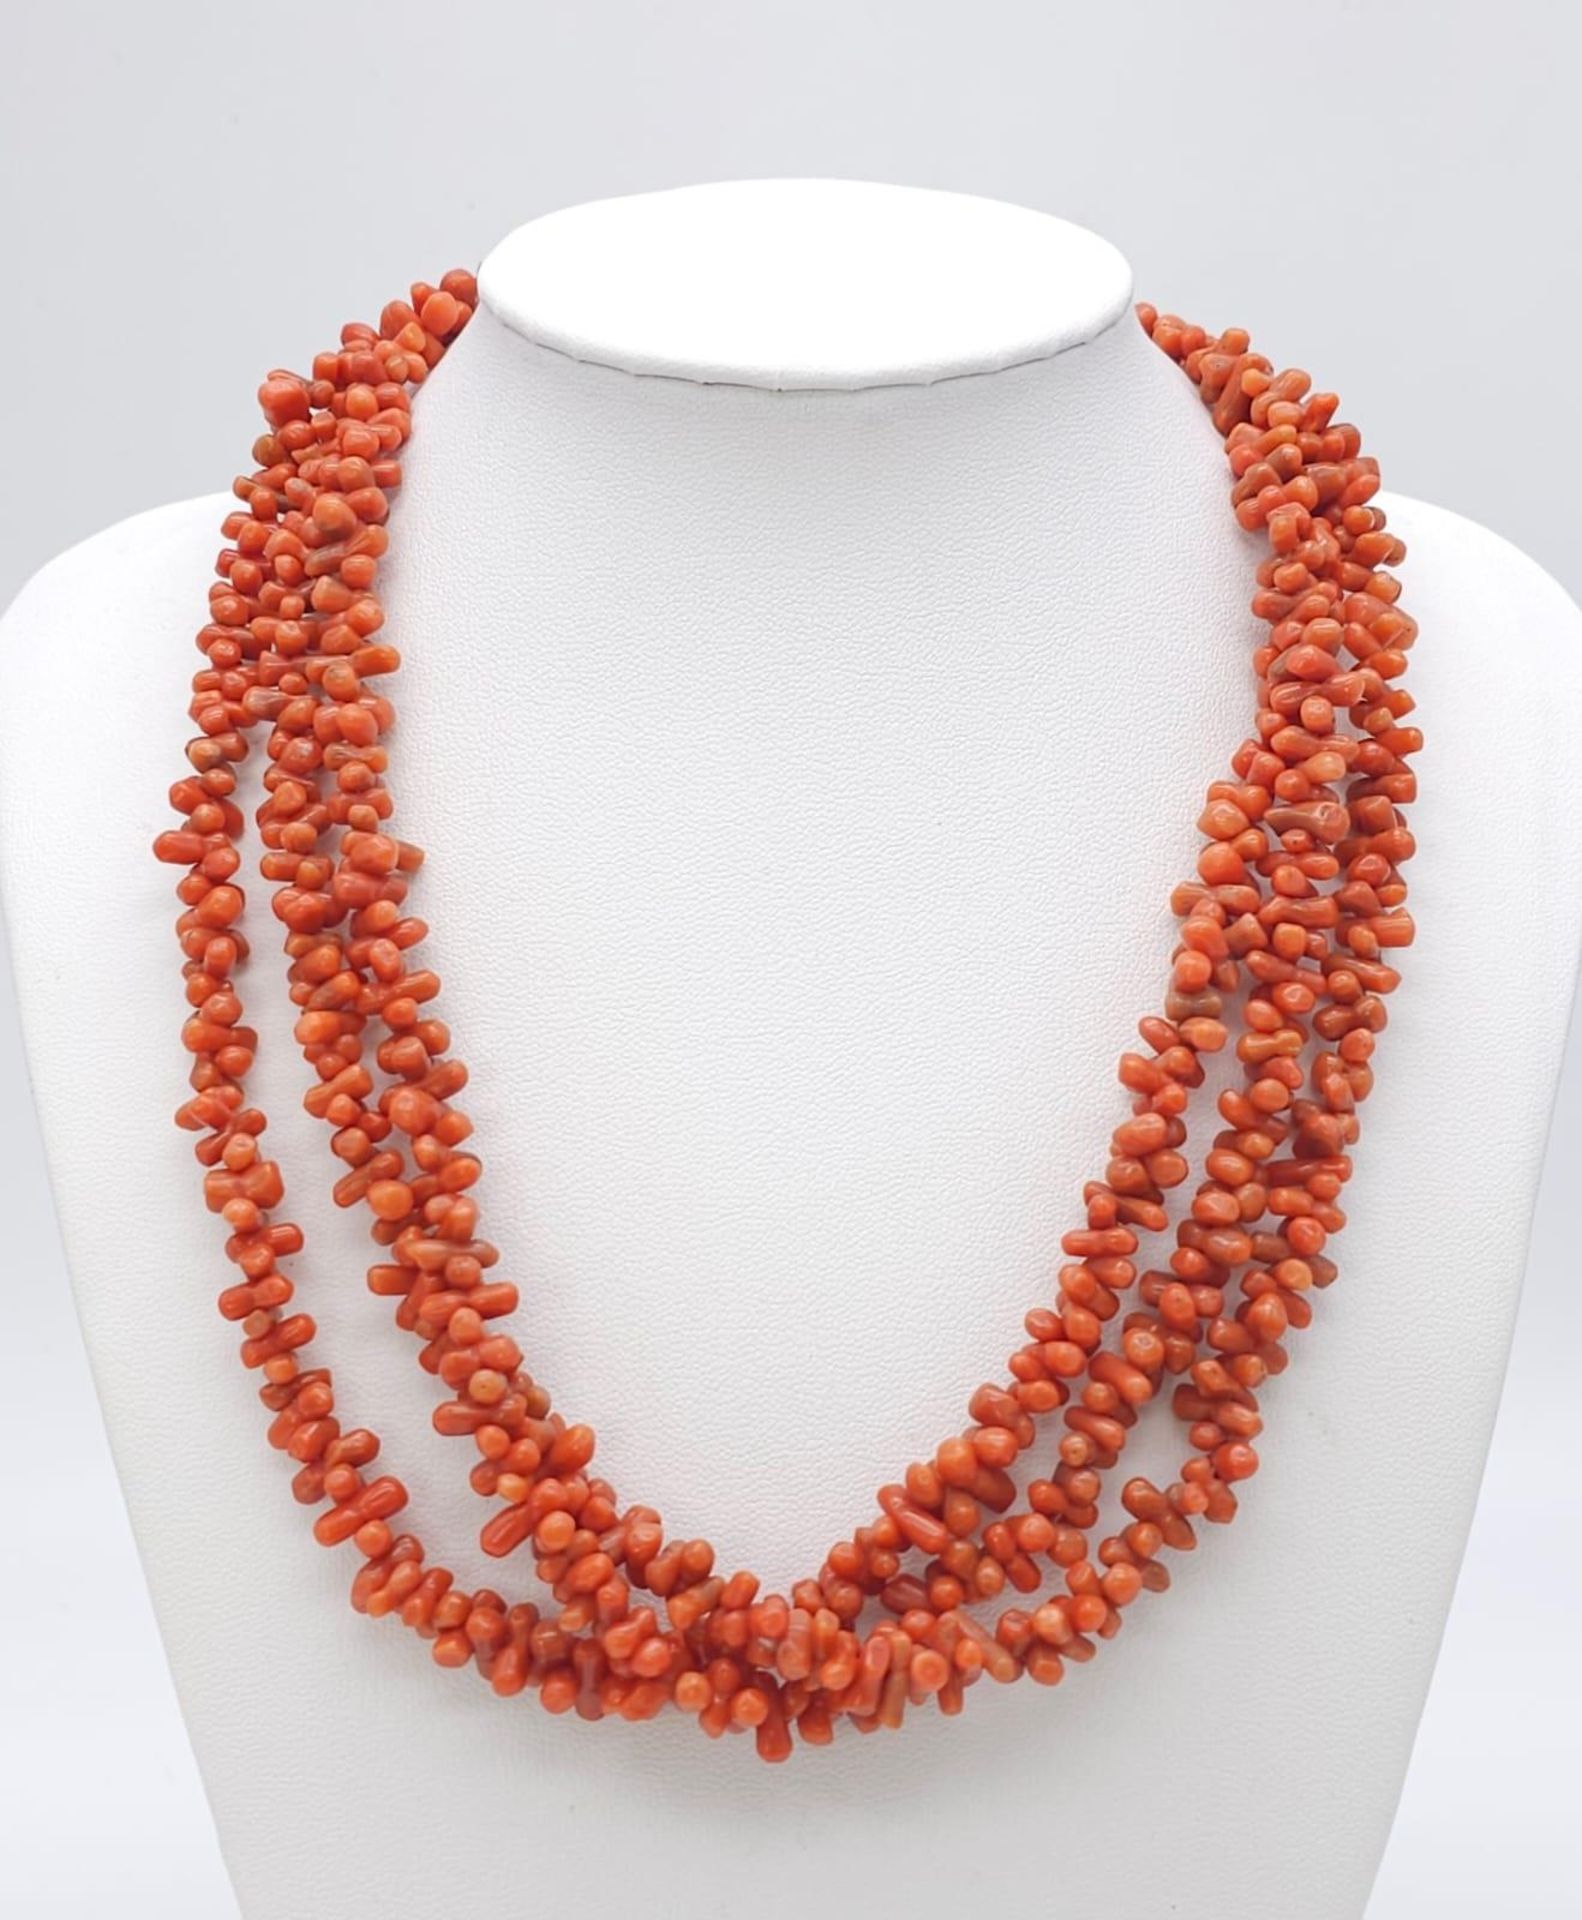 Three Strand Orange Coral Necklace. Measuring 42cm in length, this bold necklace is a bright - Image 5 of 5